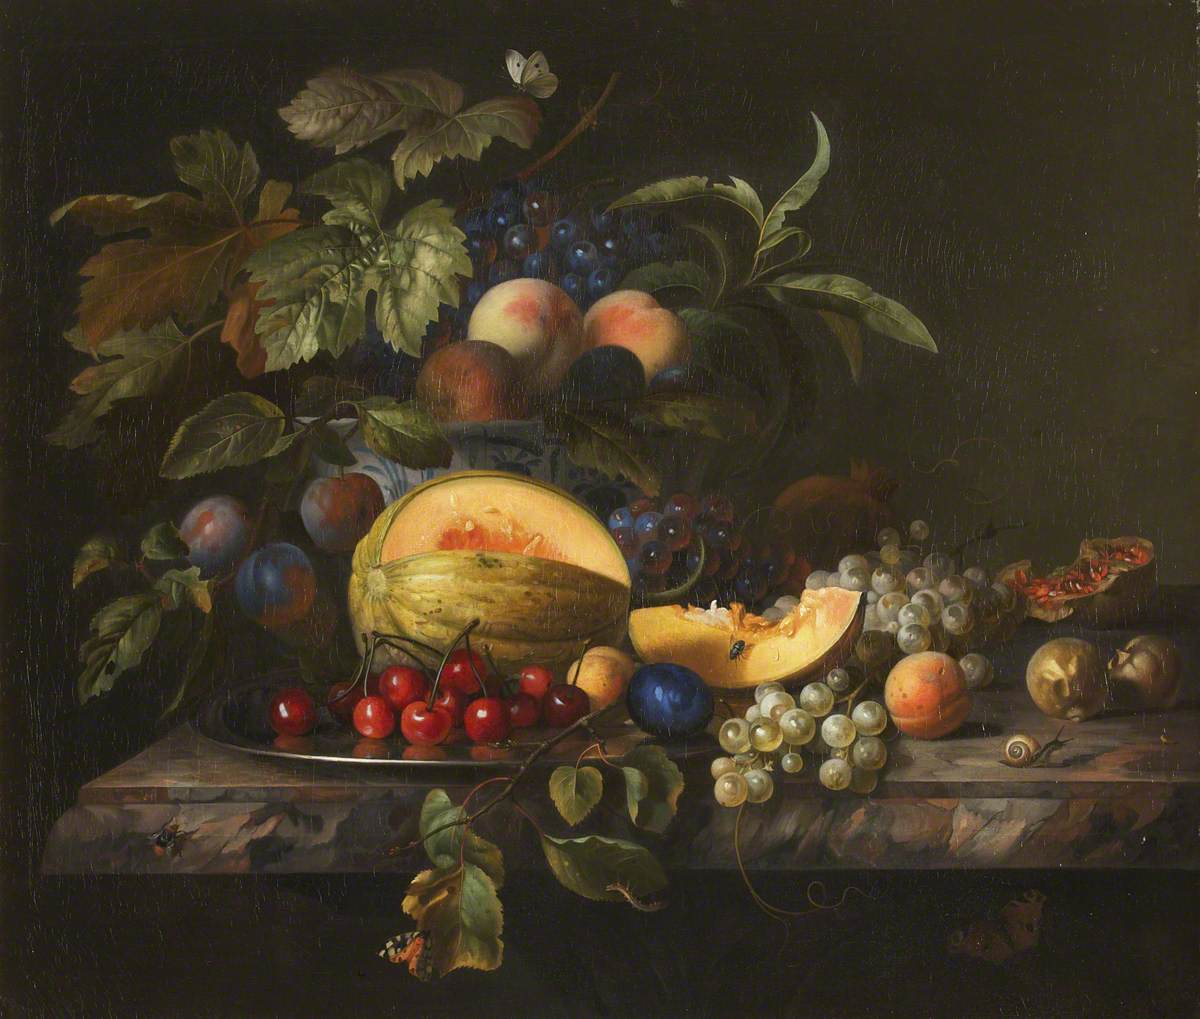 A Melon, Cherries, Grapes, and Other Fruit